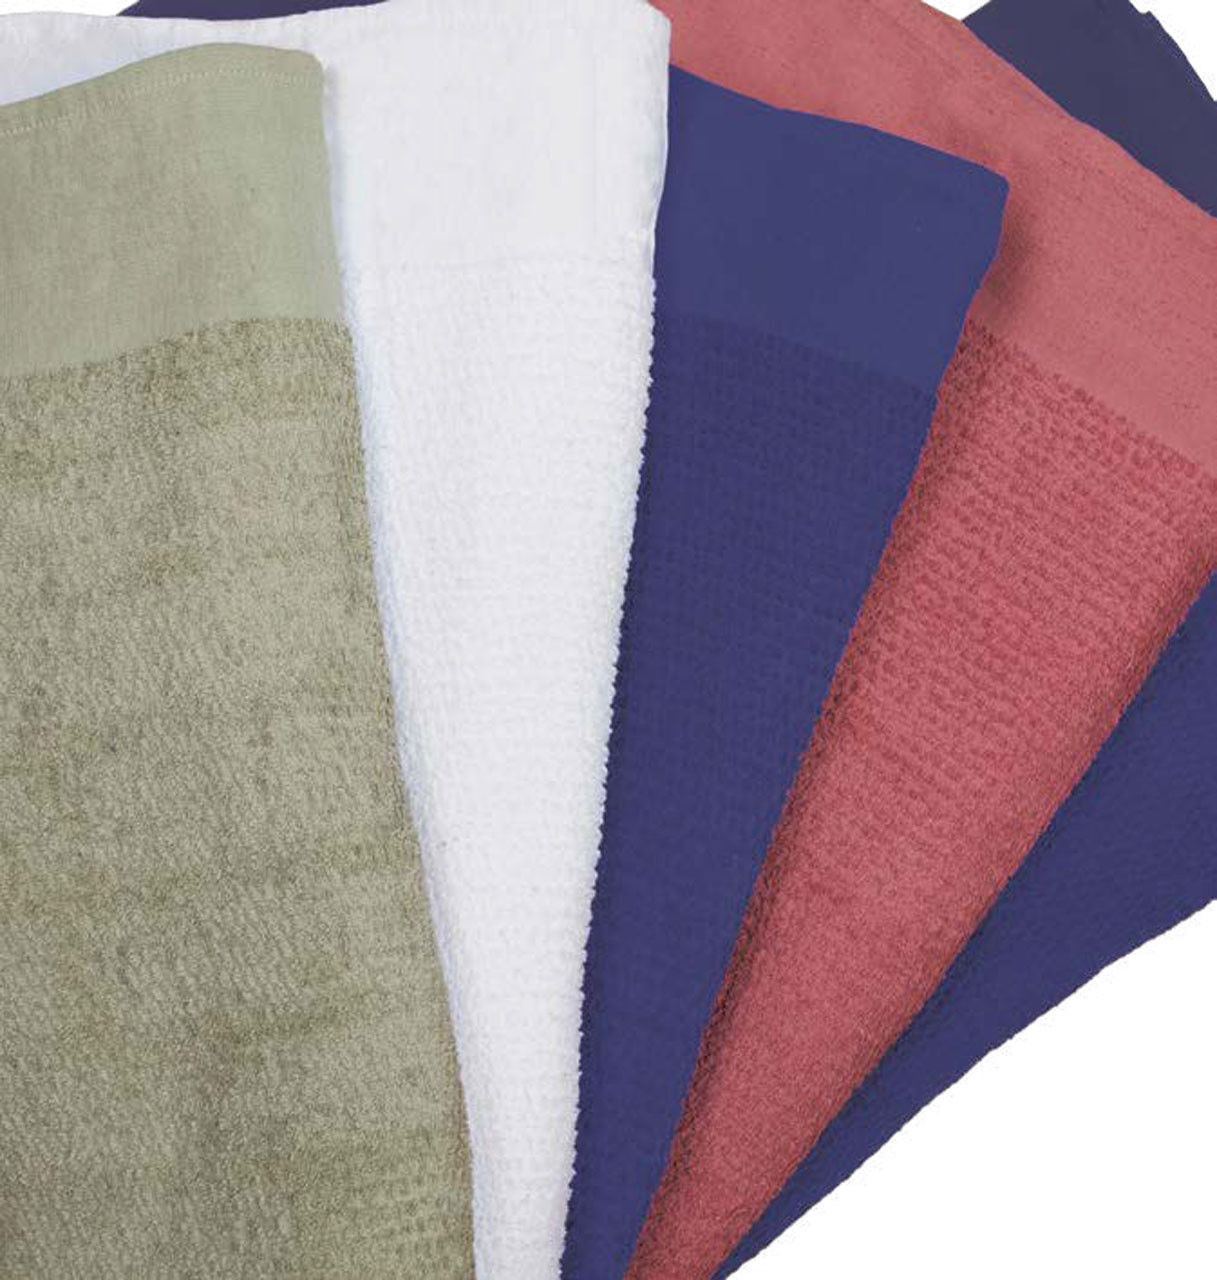 What makes the Terry Hospital Blankets unique as a terry cloth blanket?